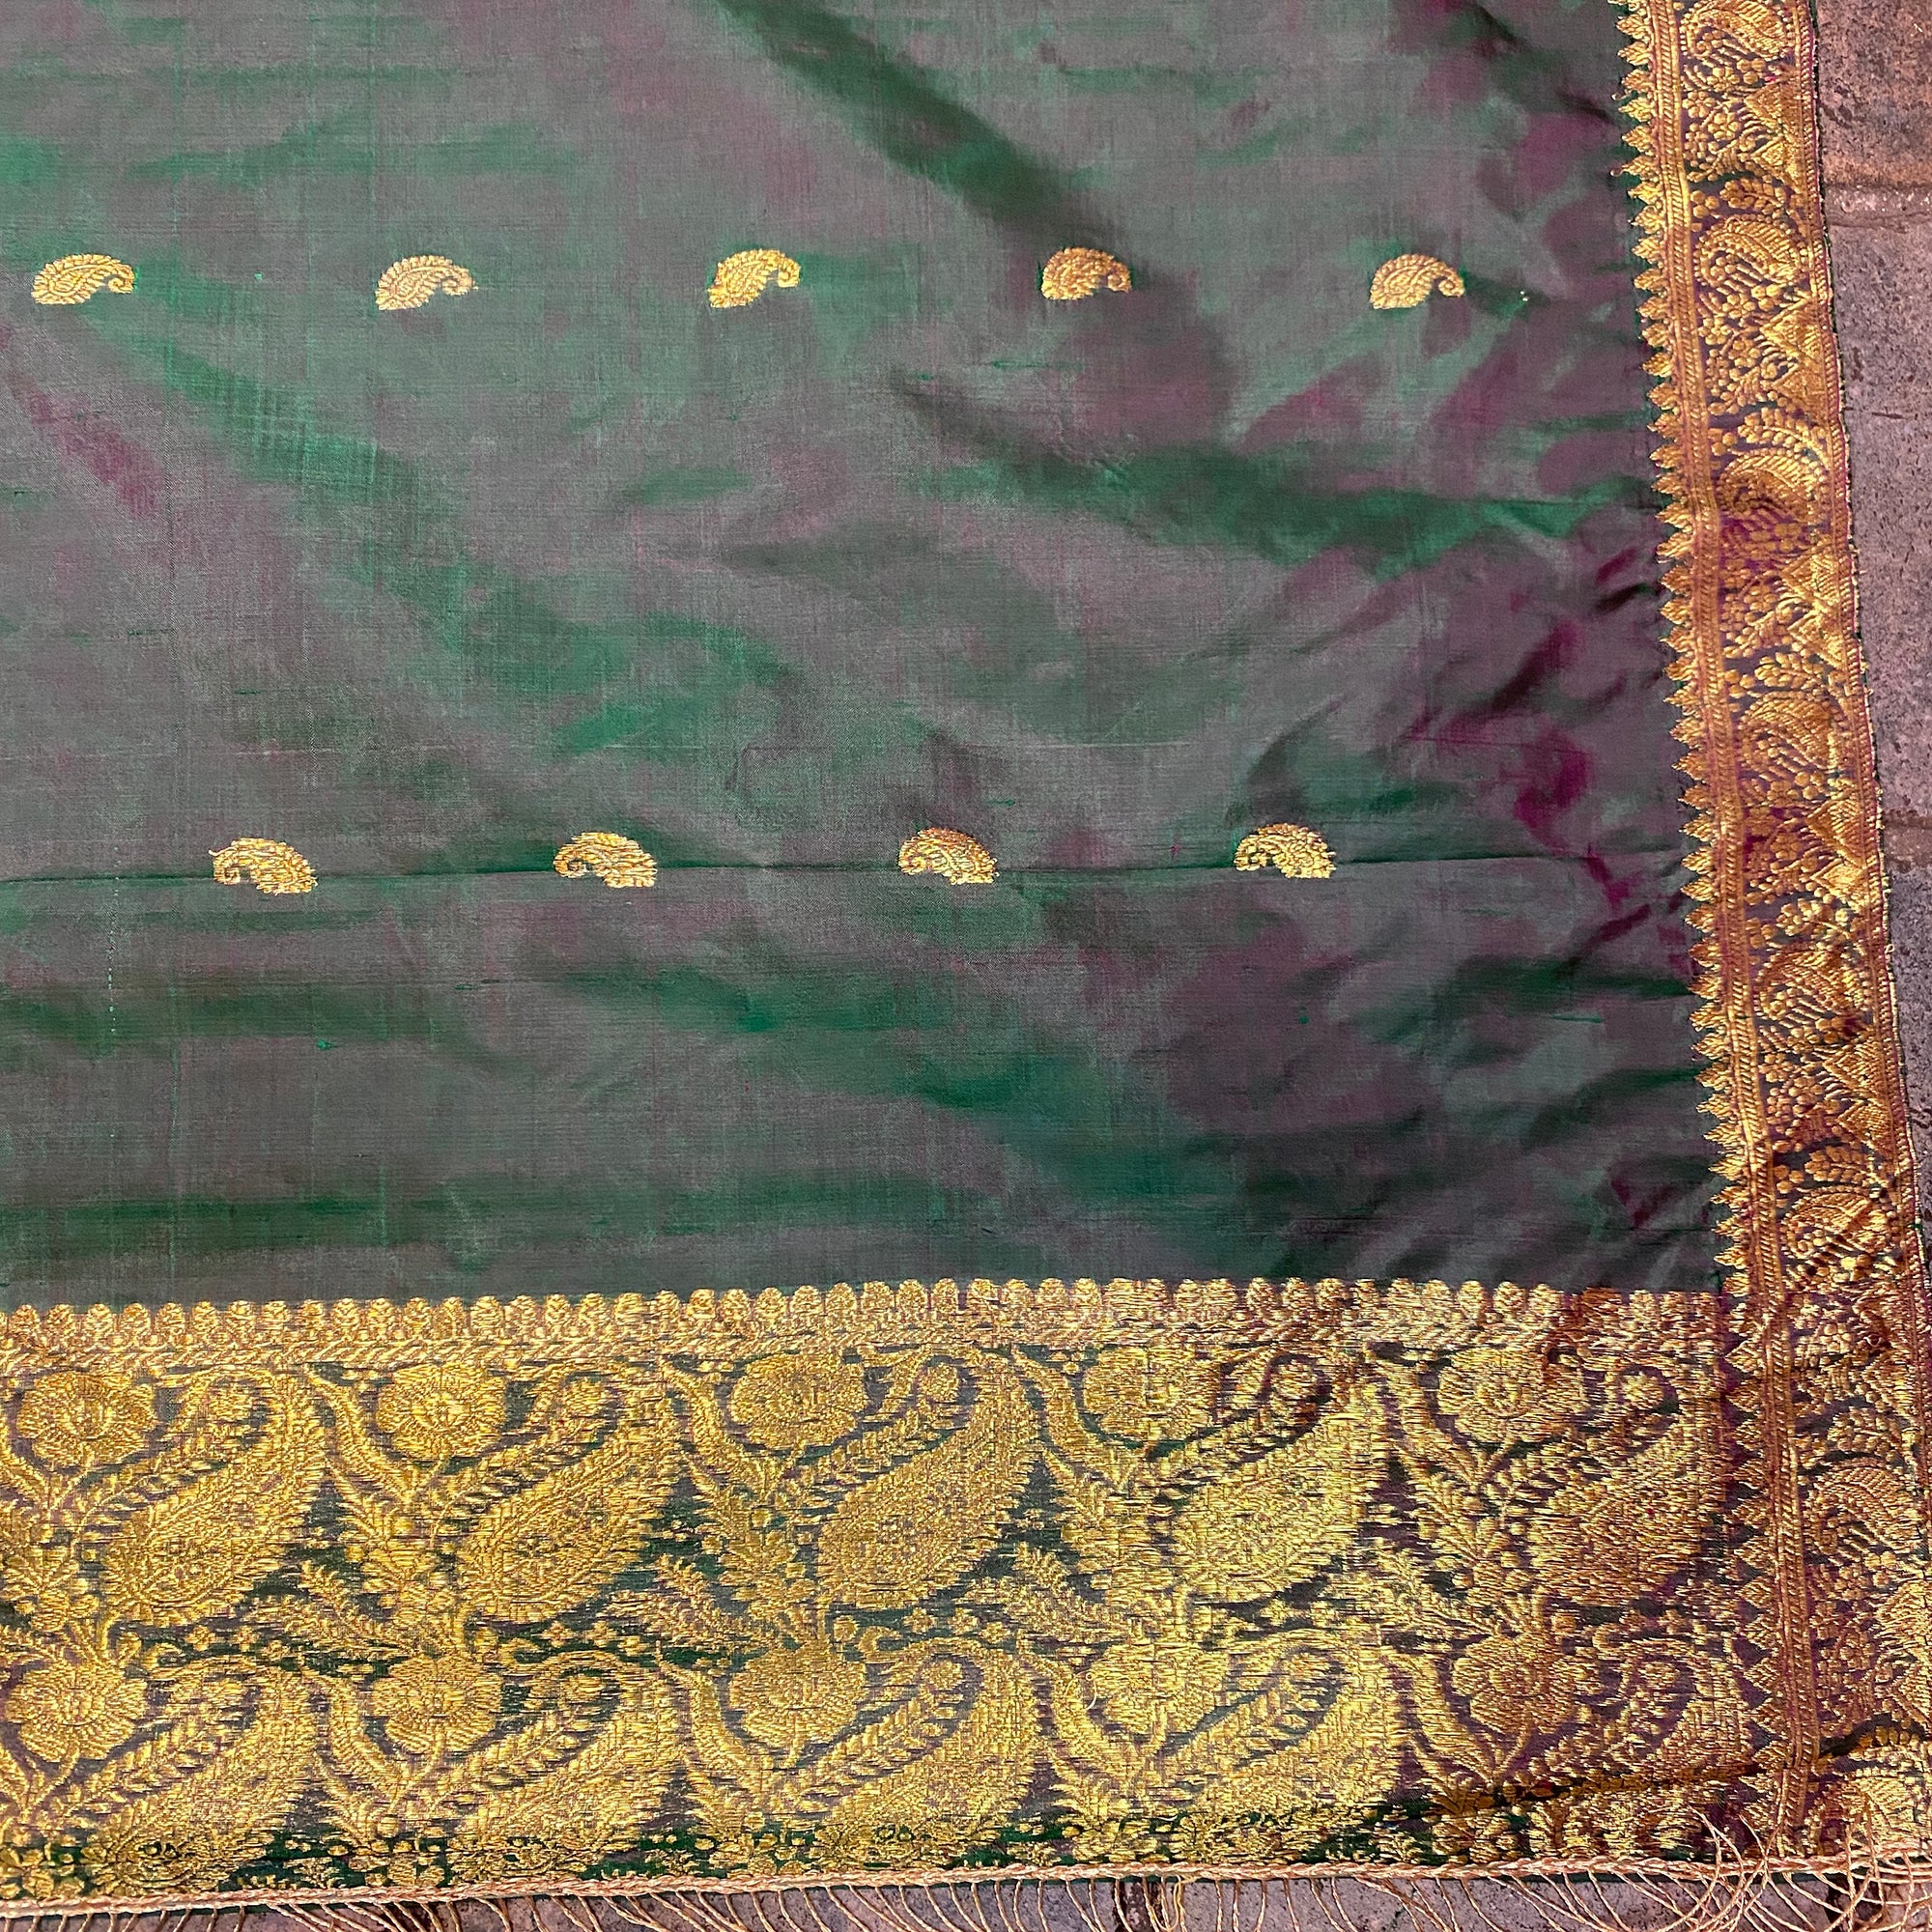 Handwoven Pure Silk and Gold Zari Dupatta Stoles-Many Colors - Vintage India NYC